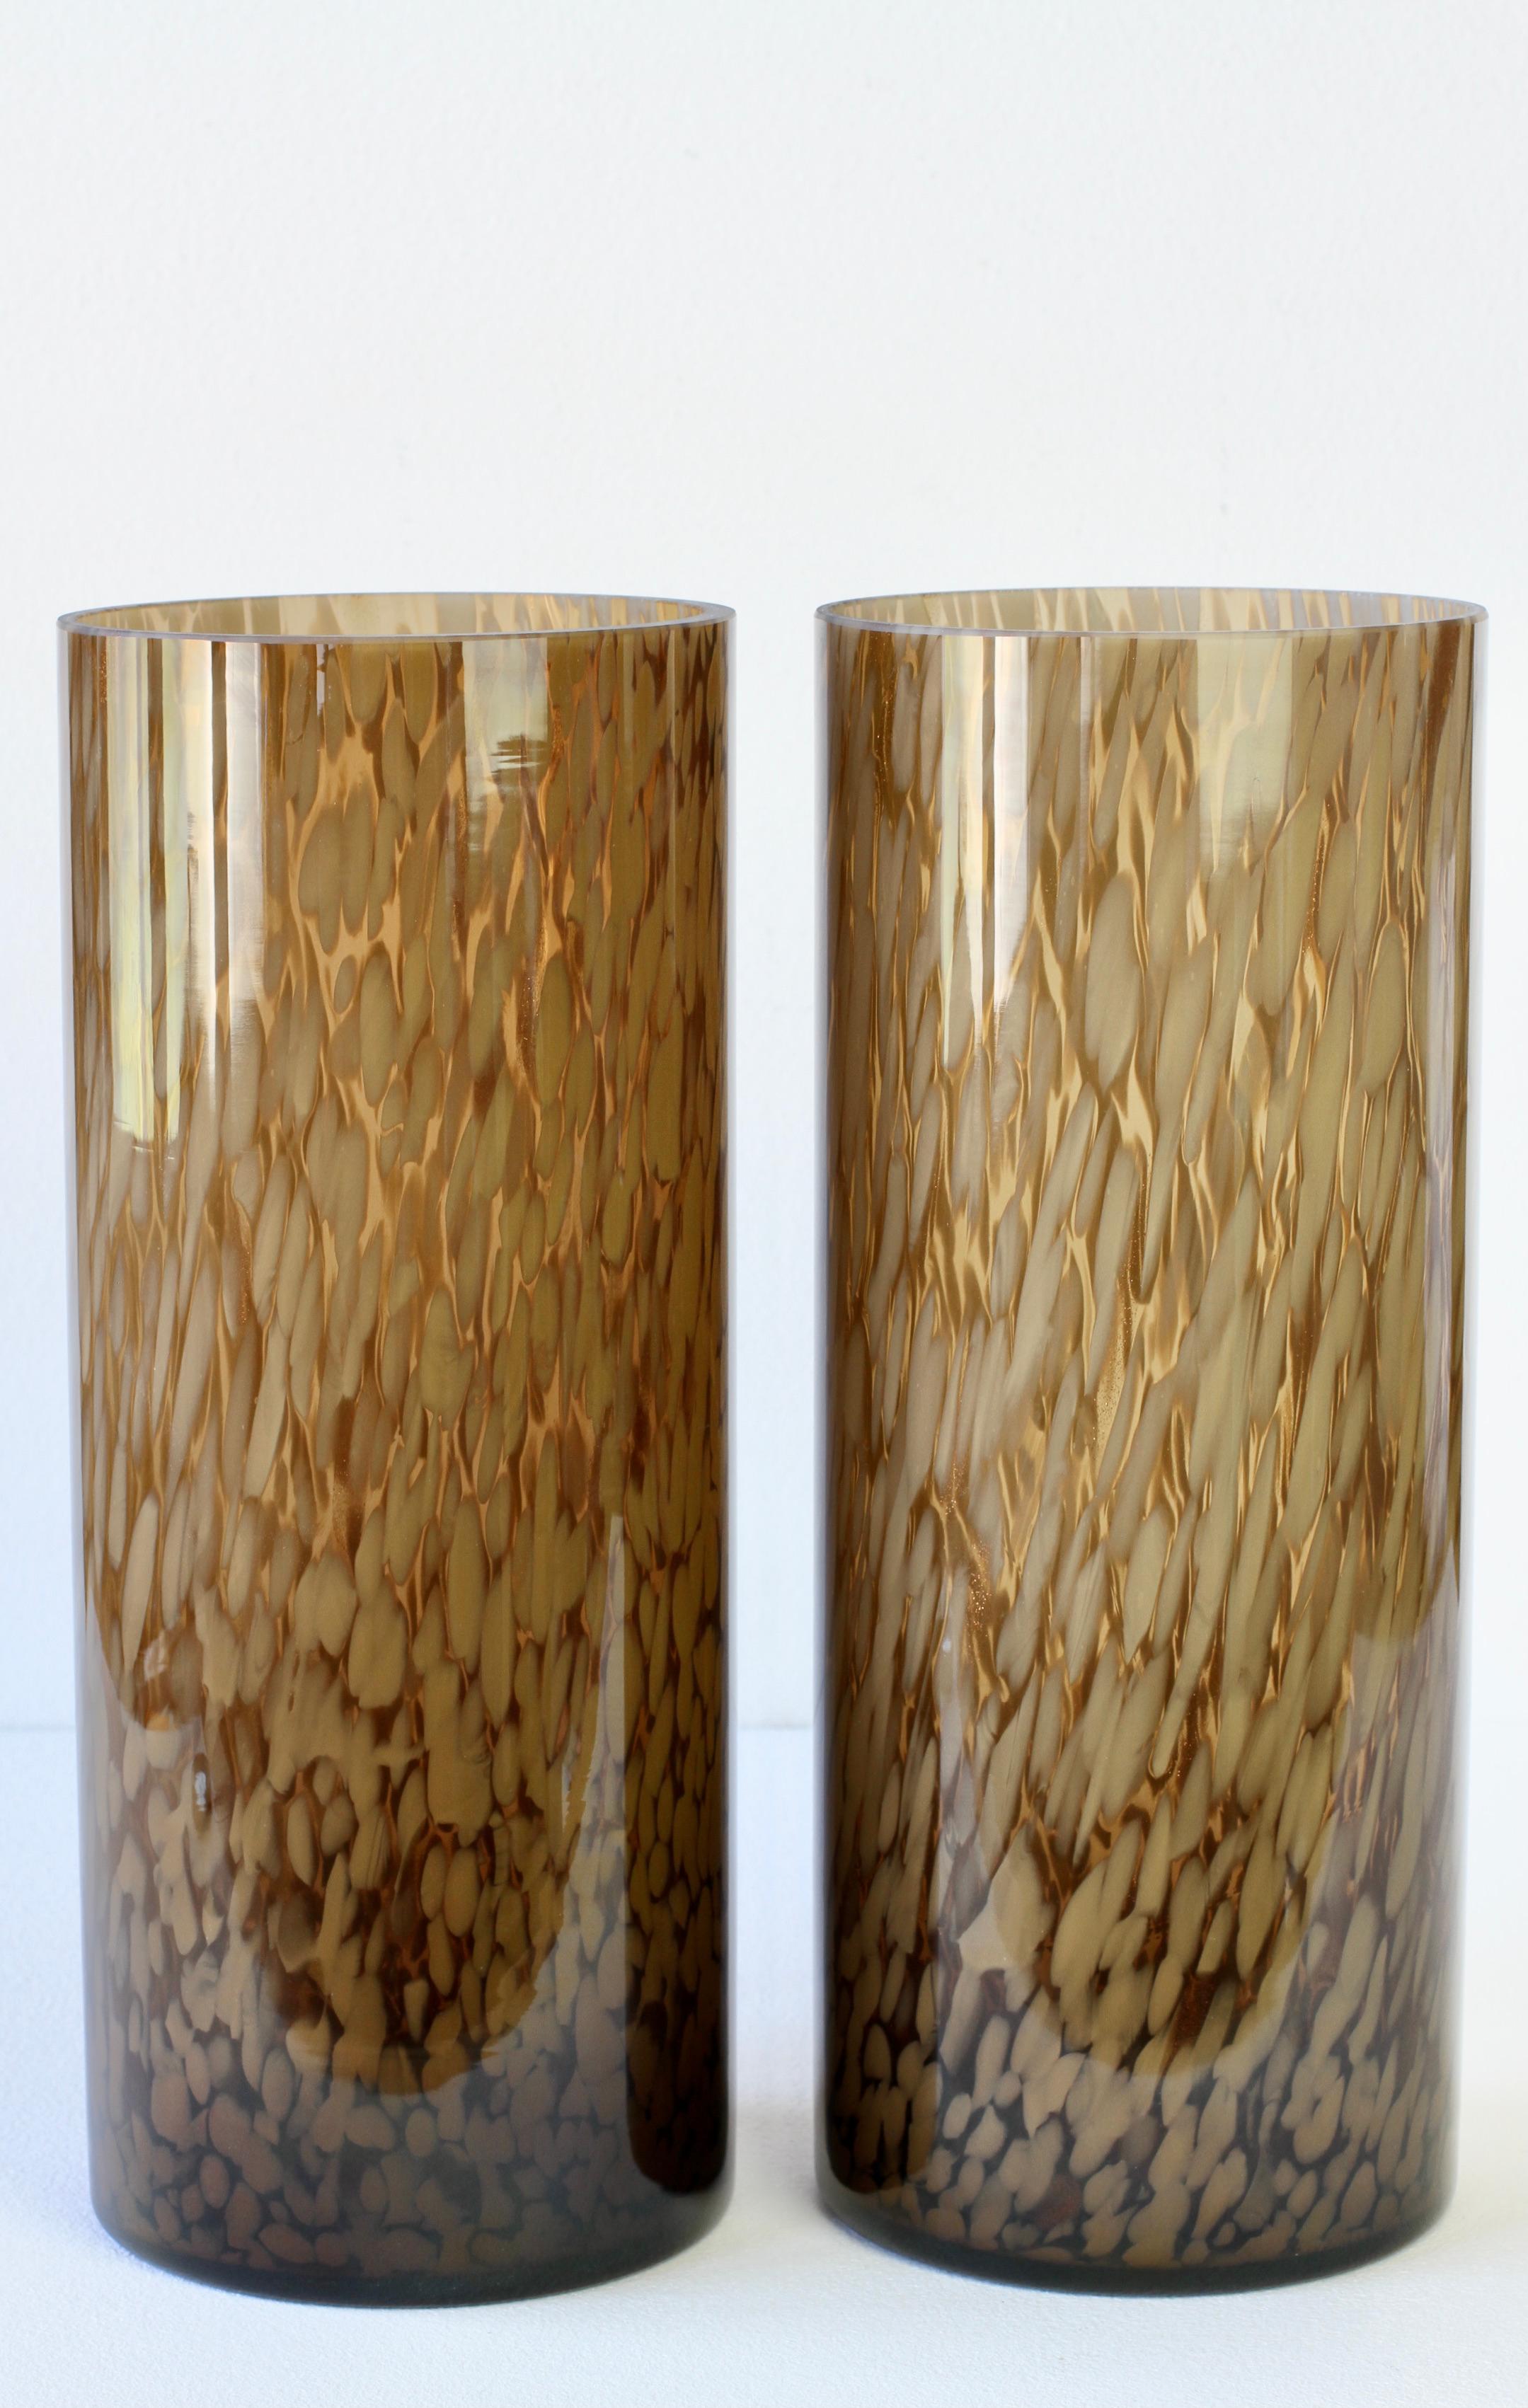 Large, tall and rare pair 'Aventurine' Cenedese vintage Italian midcentury modern Murano glass vases, made on the island of Murano, Italy, circa 1970-1990. Particularly striking is the white speckled, dotted patches encased in brown glass with